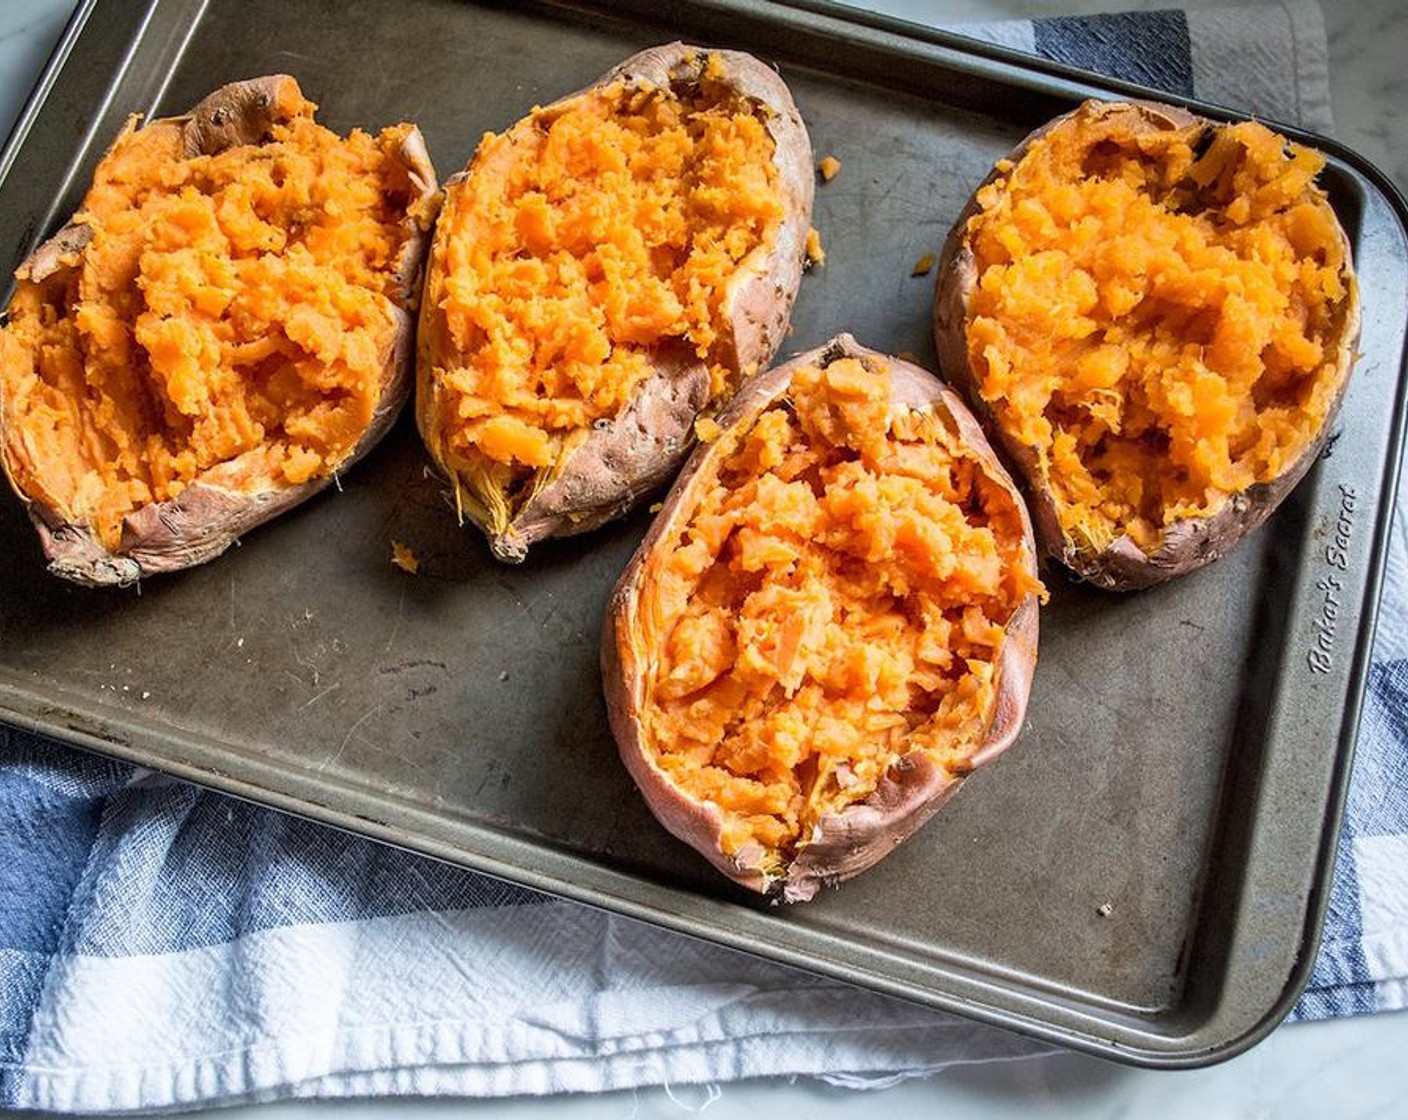 step 7 Once sweet potatoes are cooked through, cut the skin off the top of each then use a fork to break apart and mash the cooked flesh.